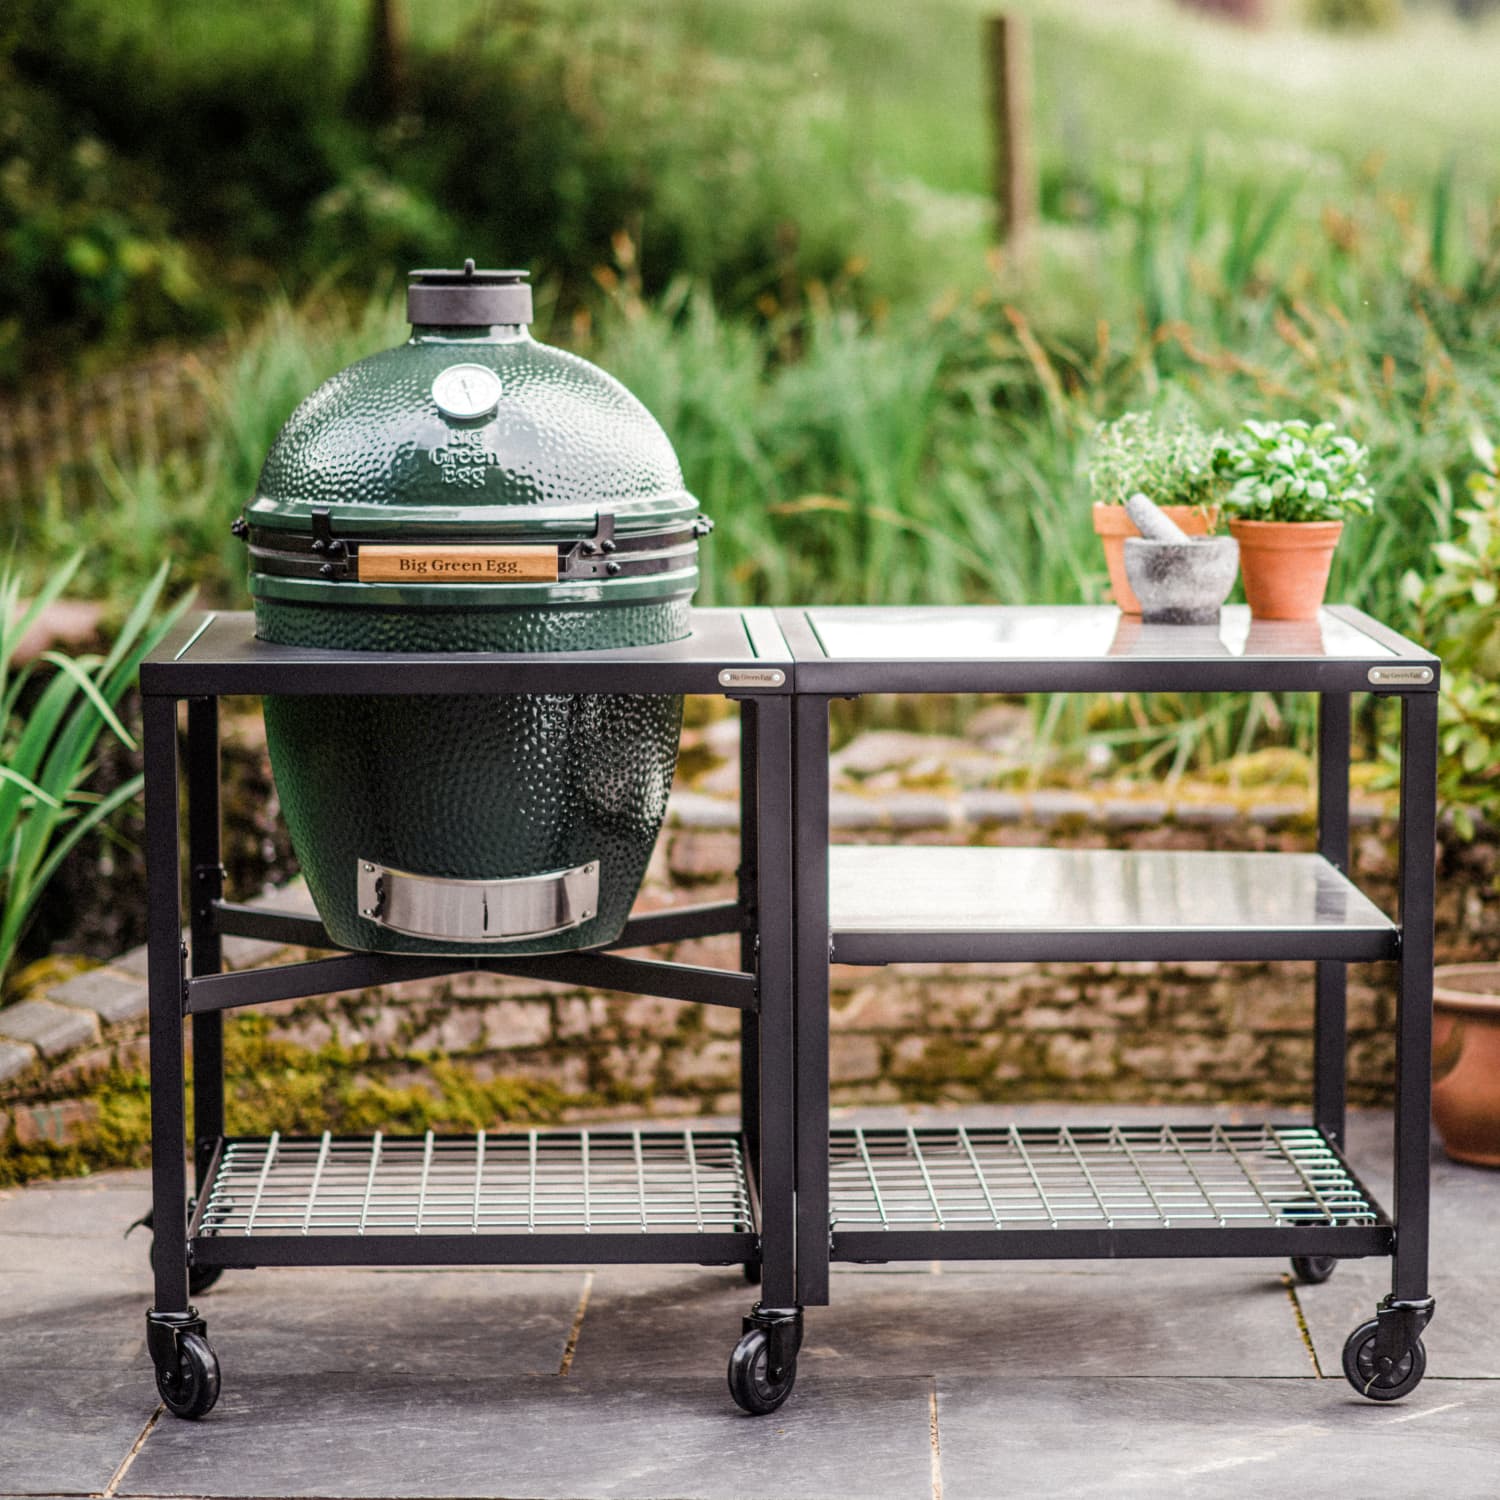 laser verkiezing transactie What's a Big Green Egg - and Is It Worth the Money? | Kitchn